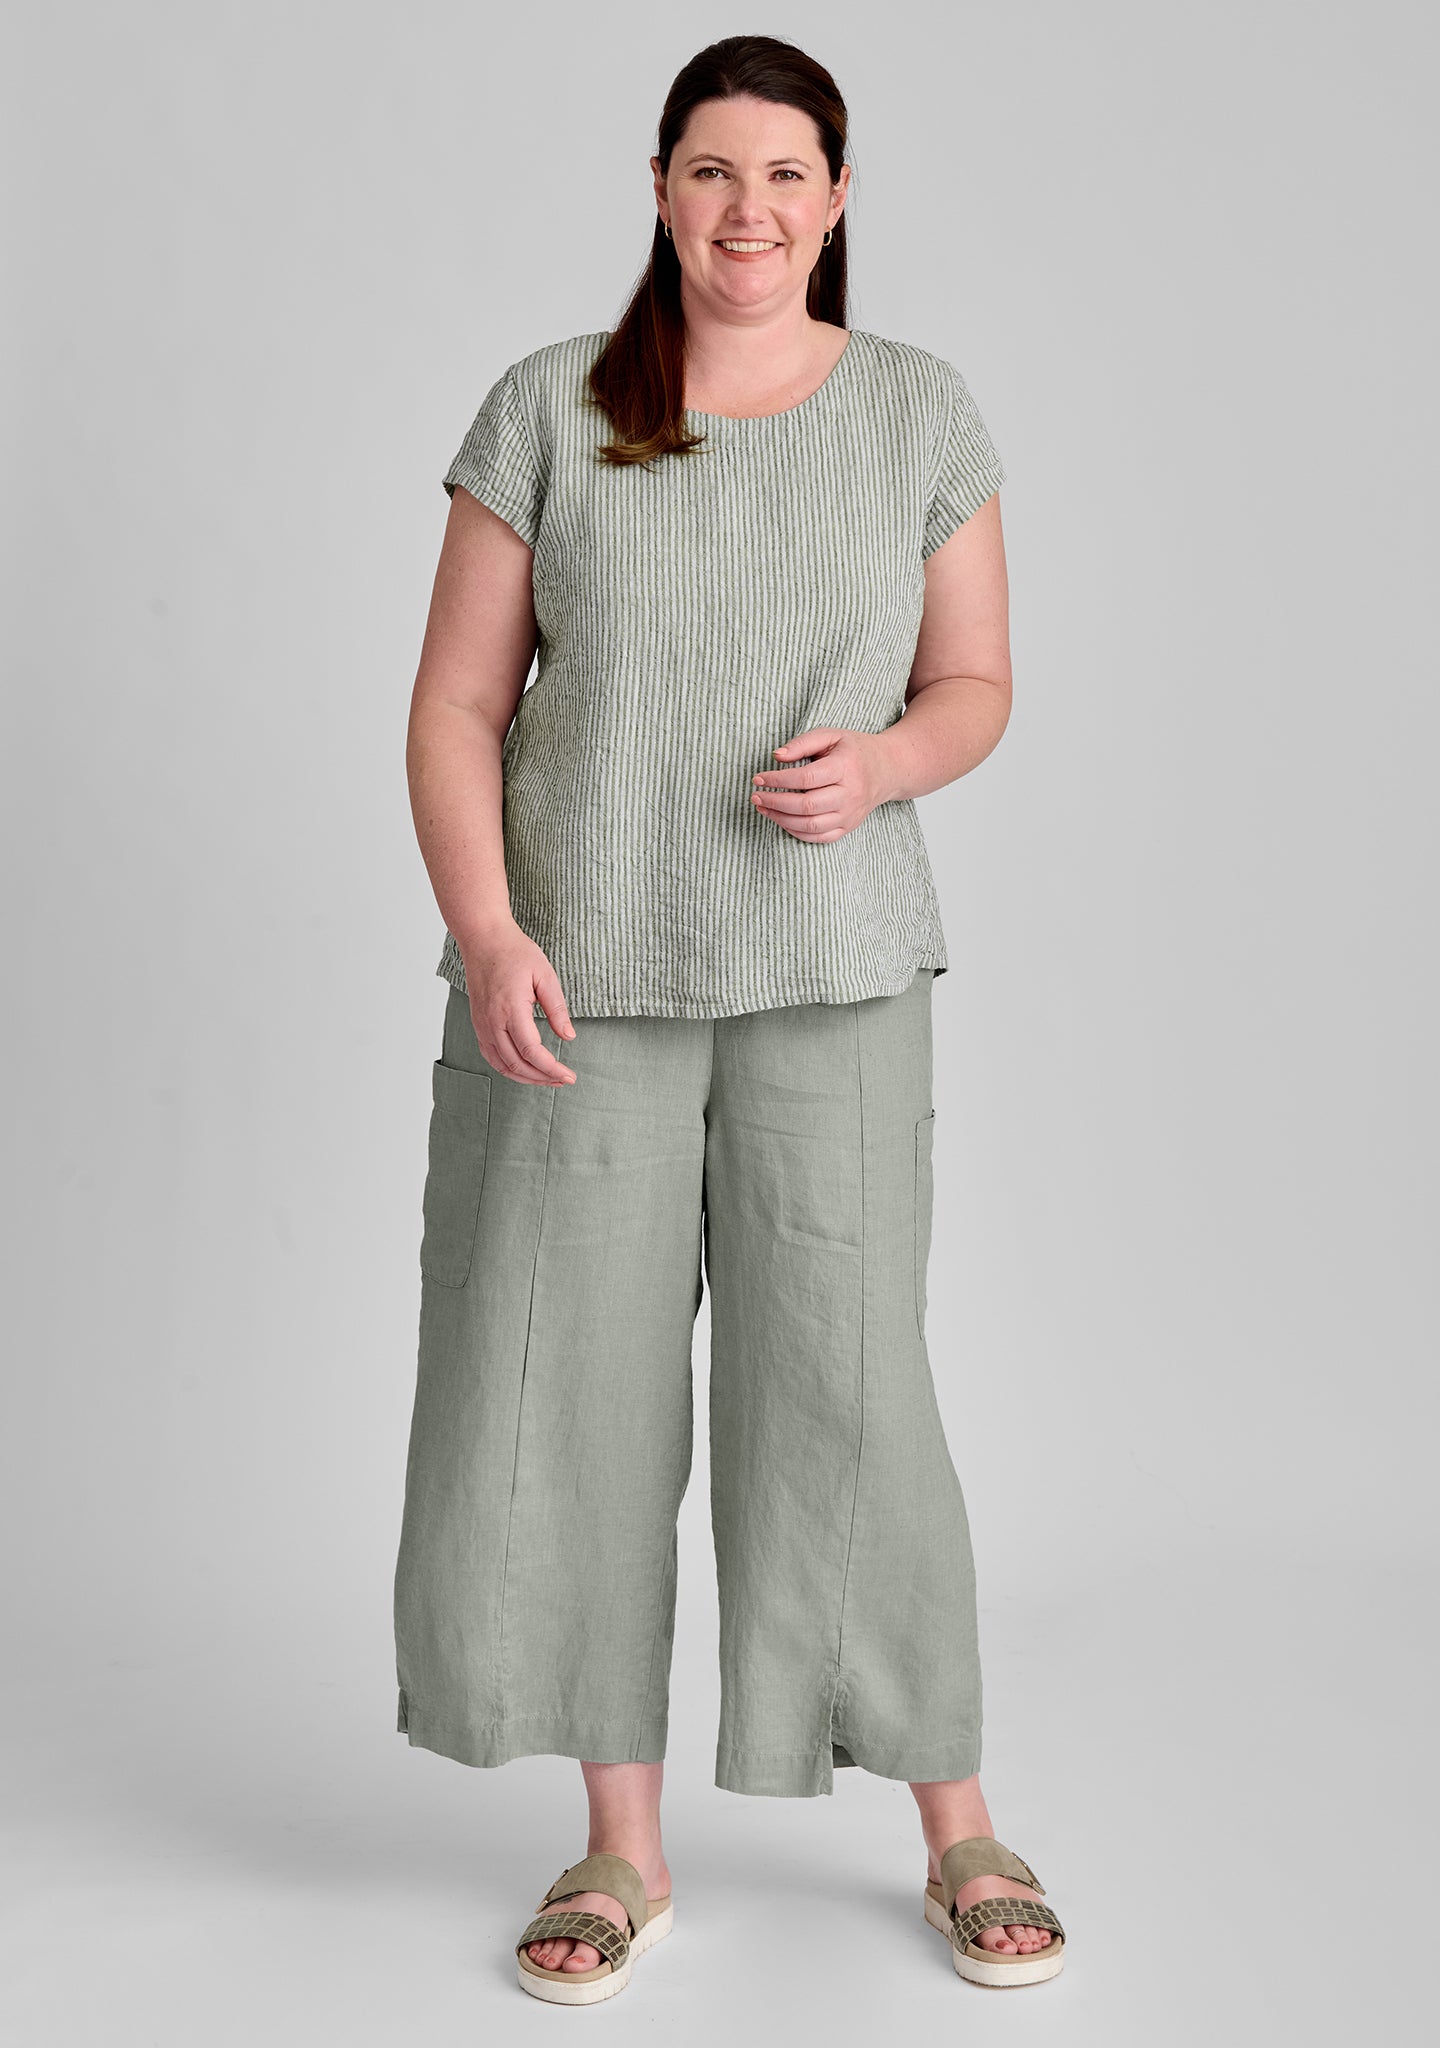 FLAX linen top in green with pants in green